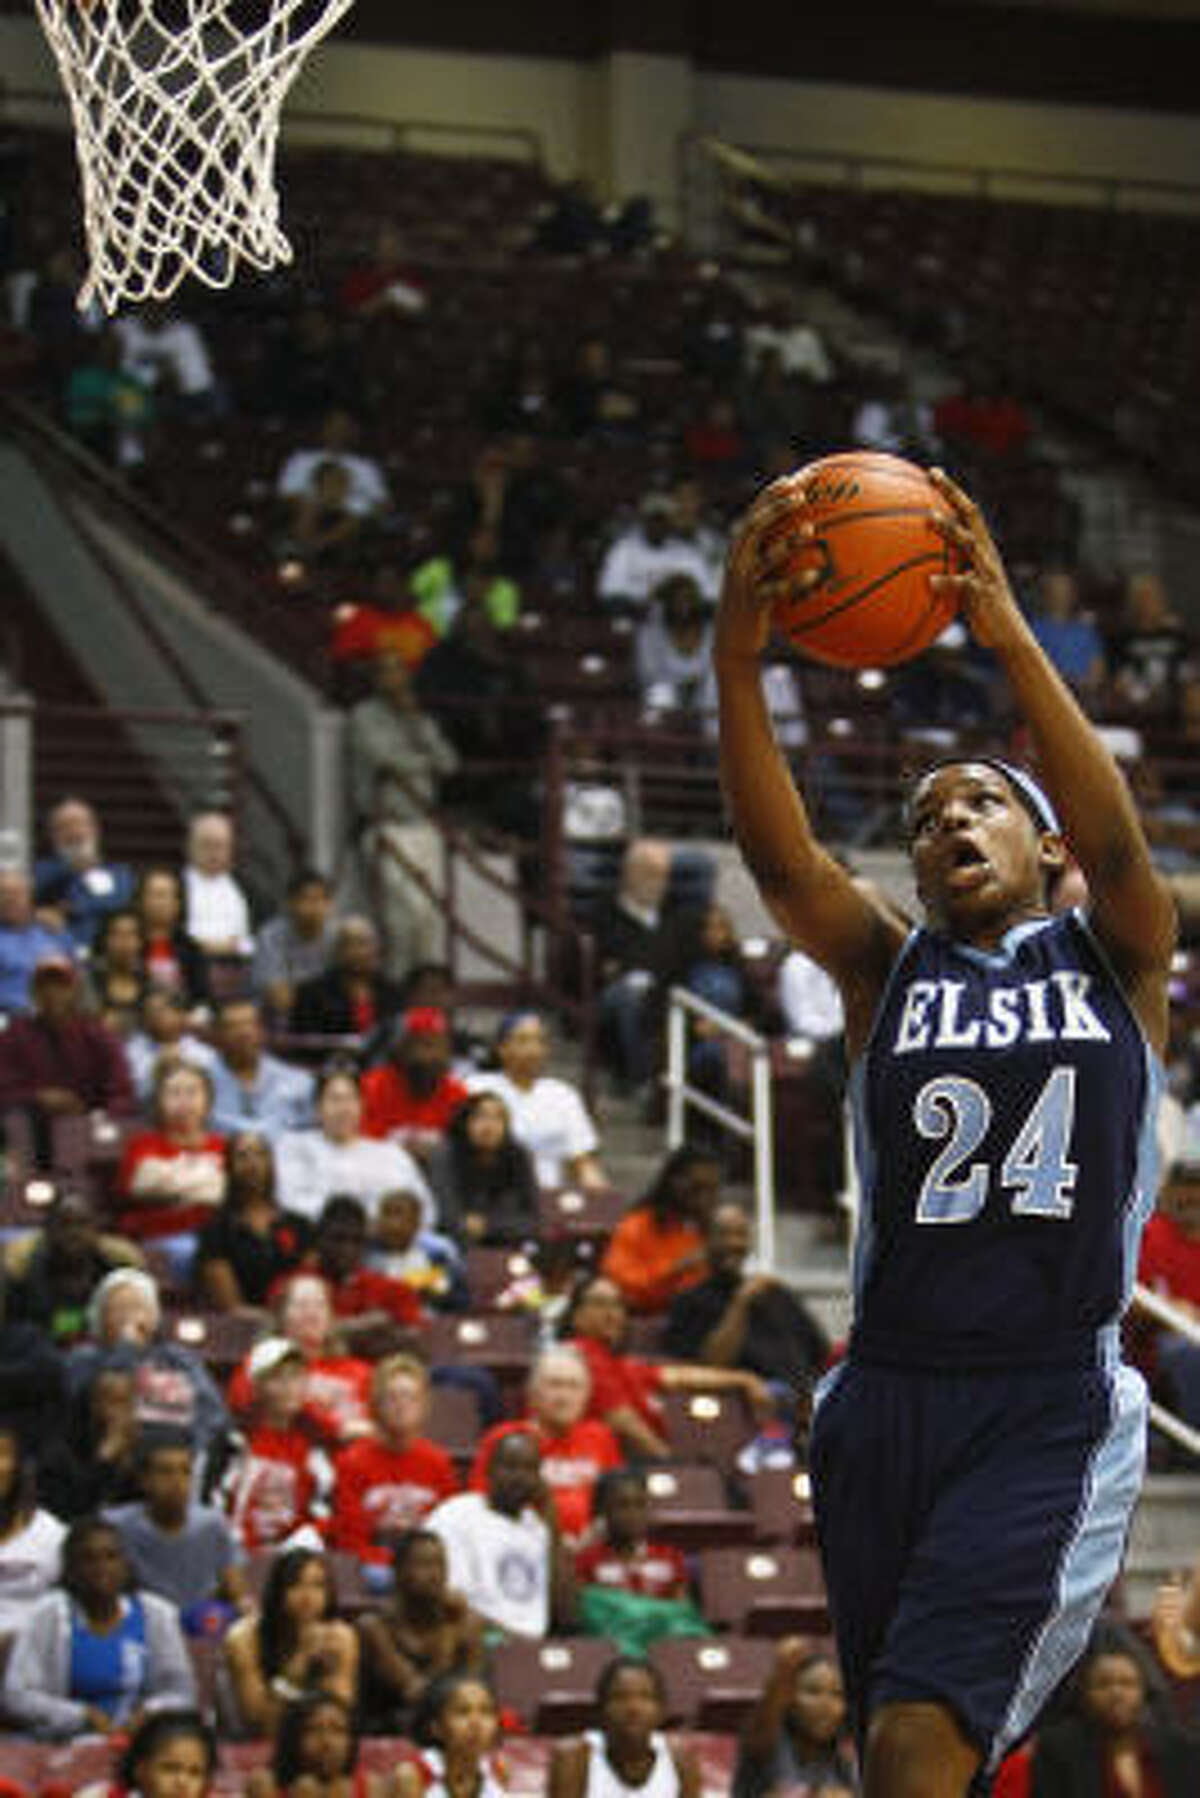 Elsik's Crystal Porter goes up for a layup during Saturday's game.